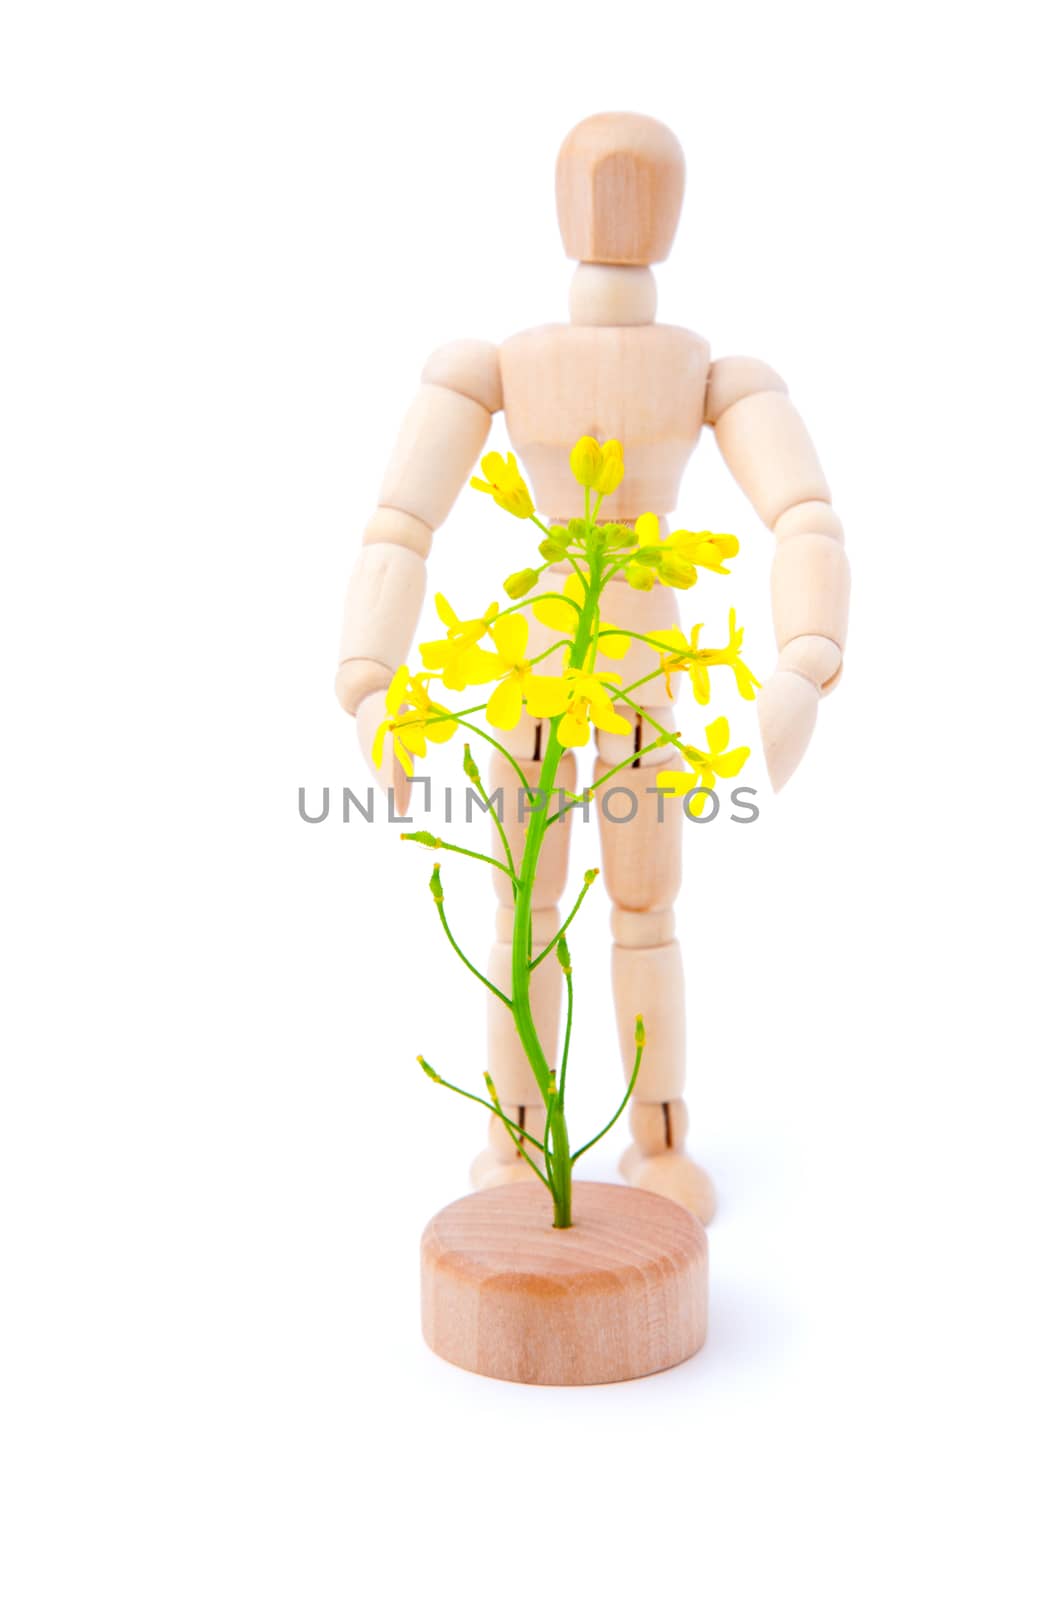 Rape blossoms with a wooden man, isolated on white background